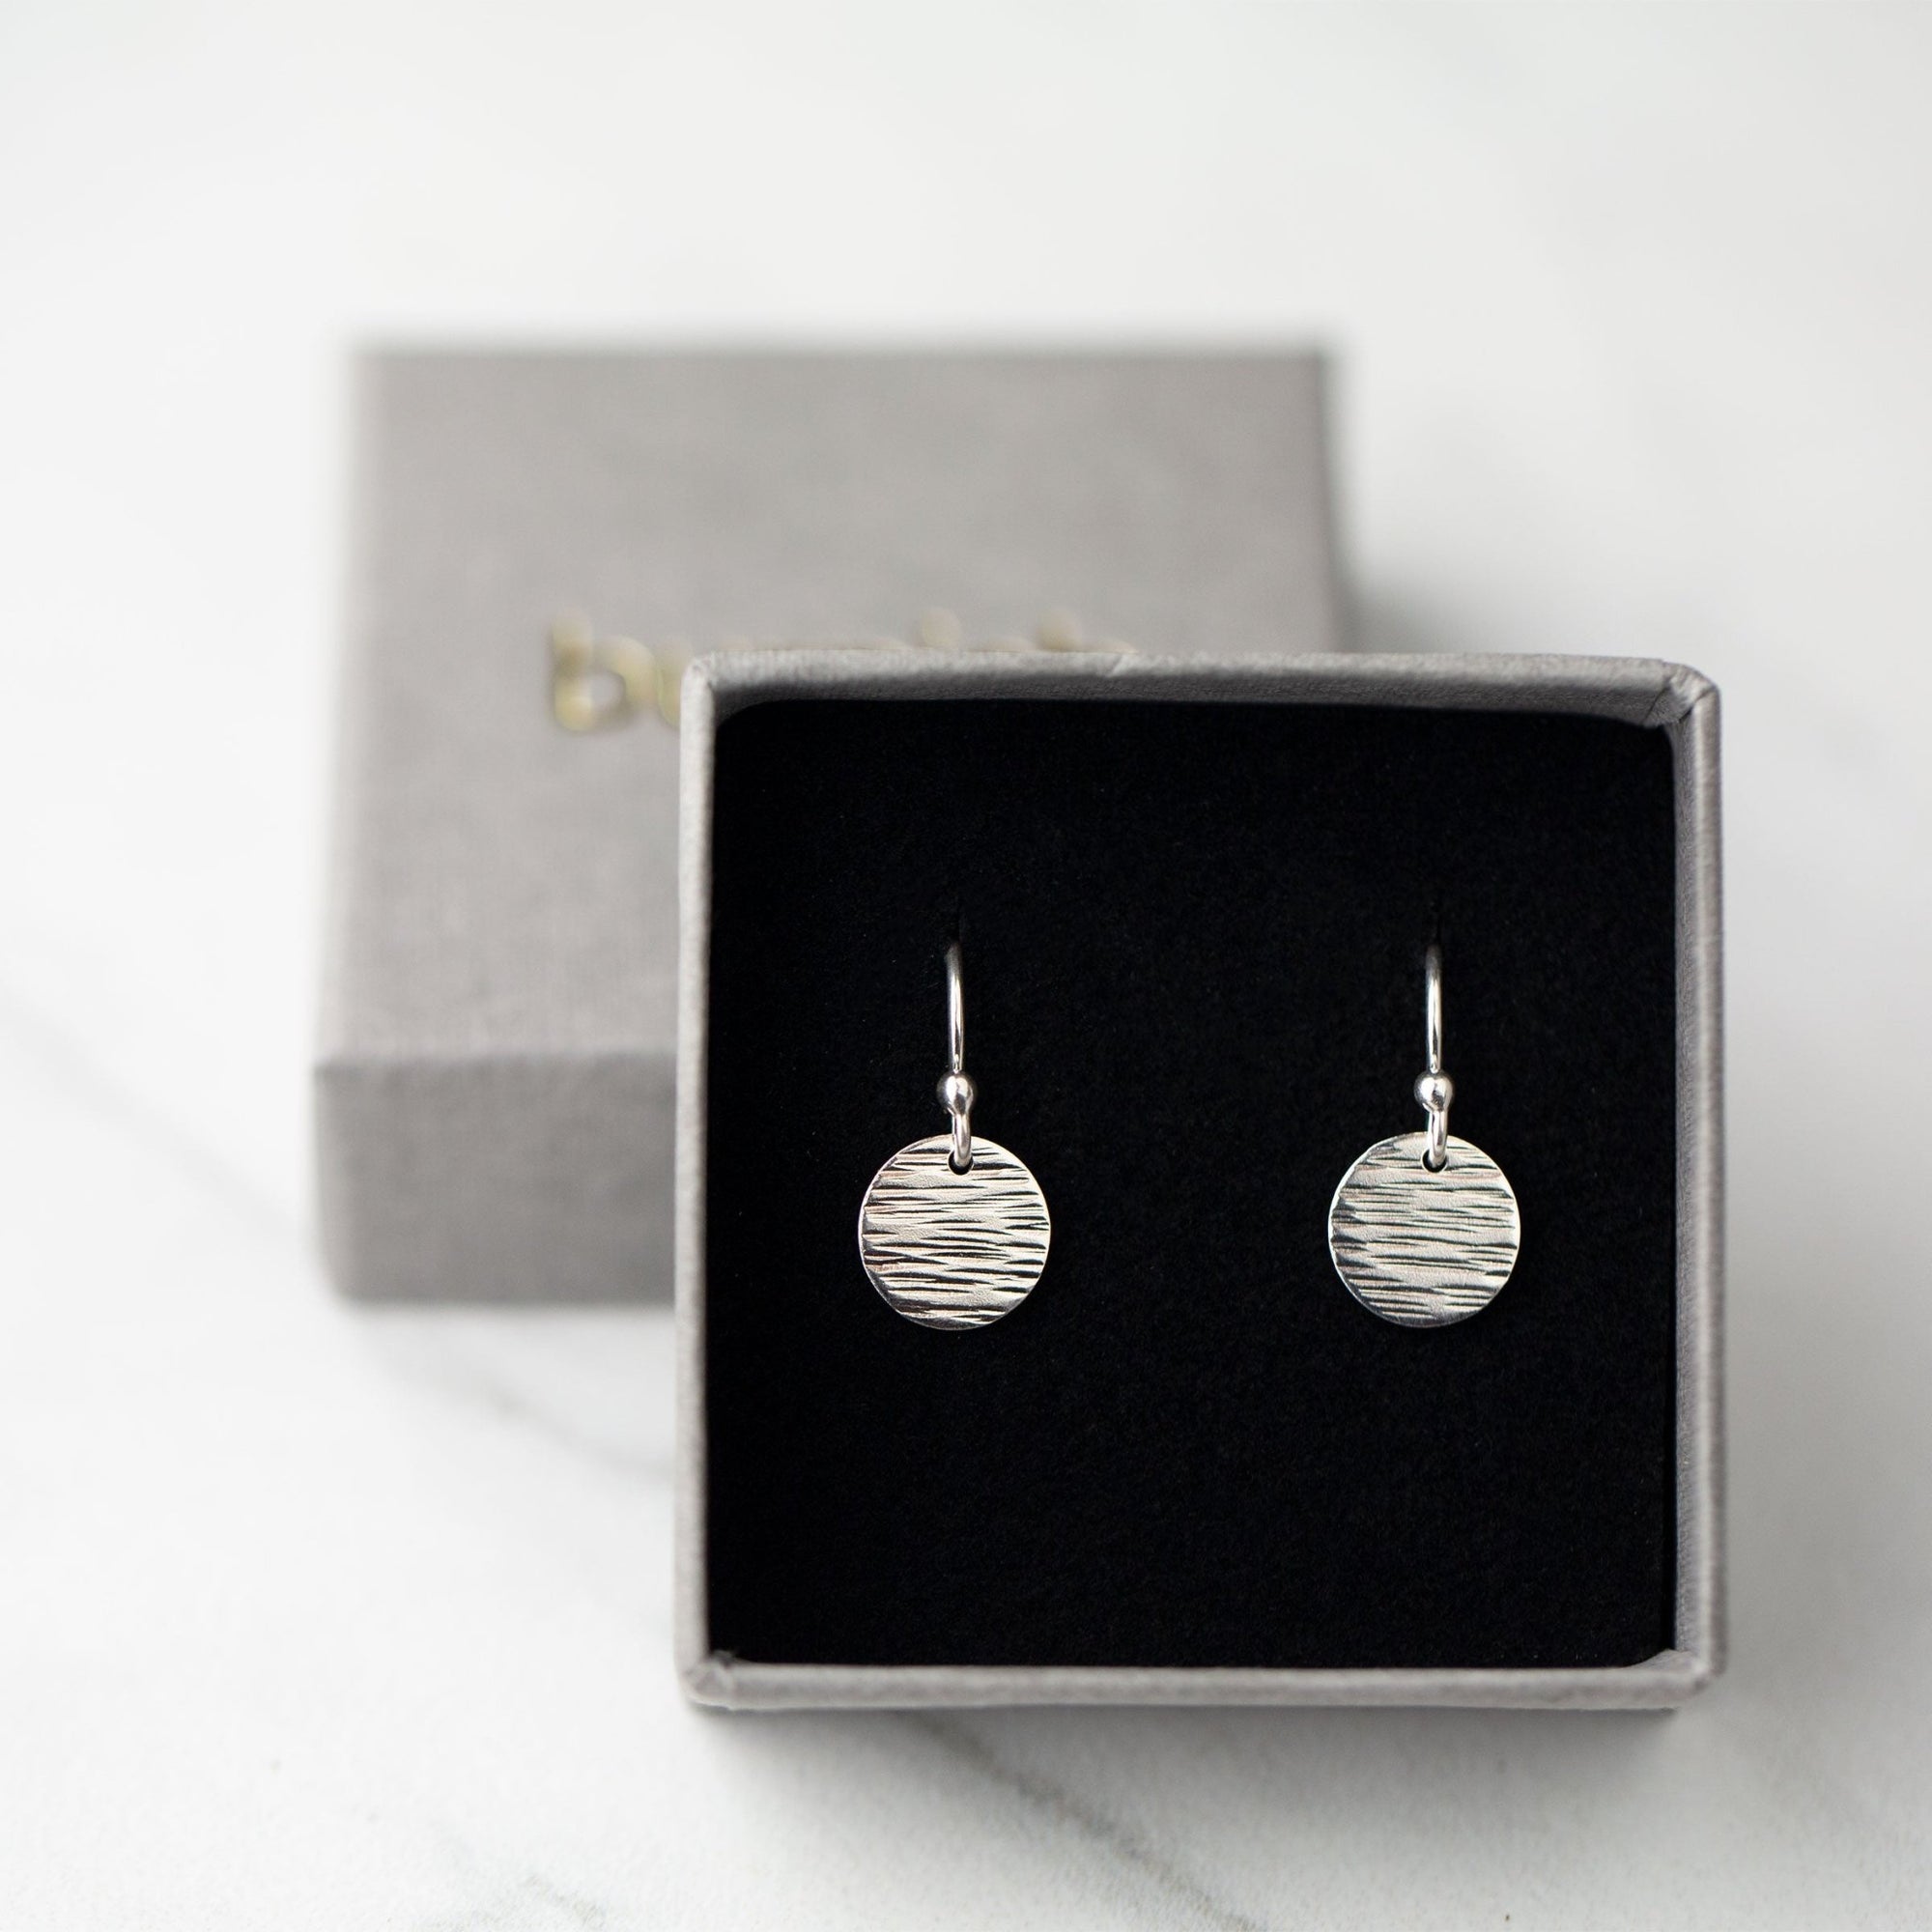 Small Silver Bark Textured Disc Earrings